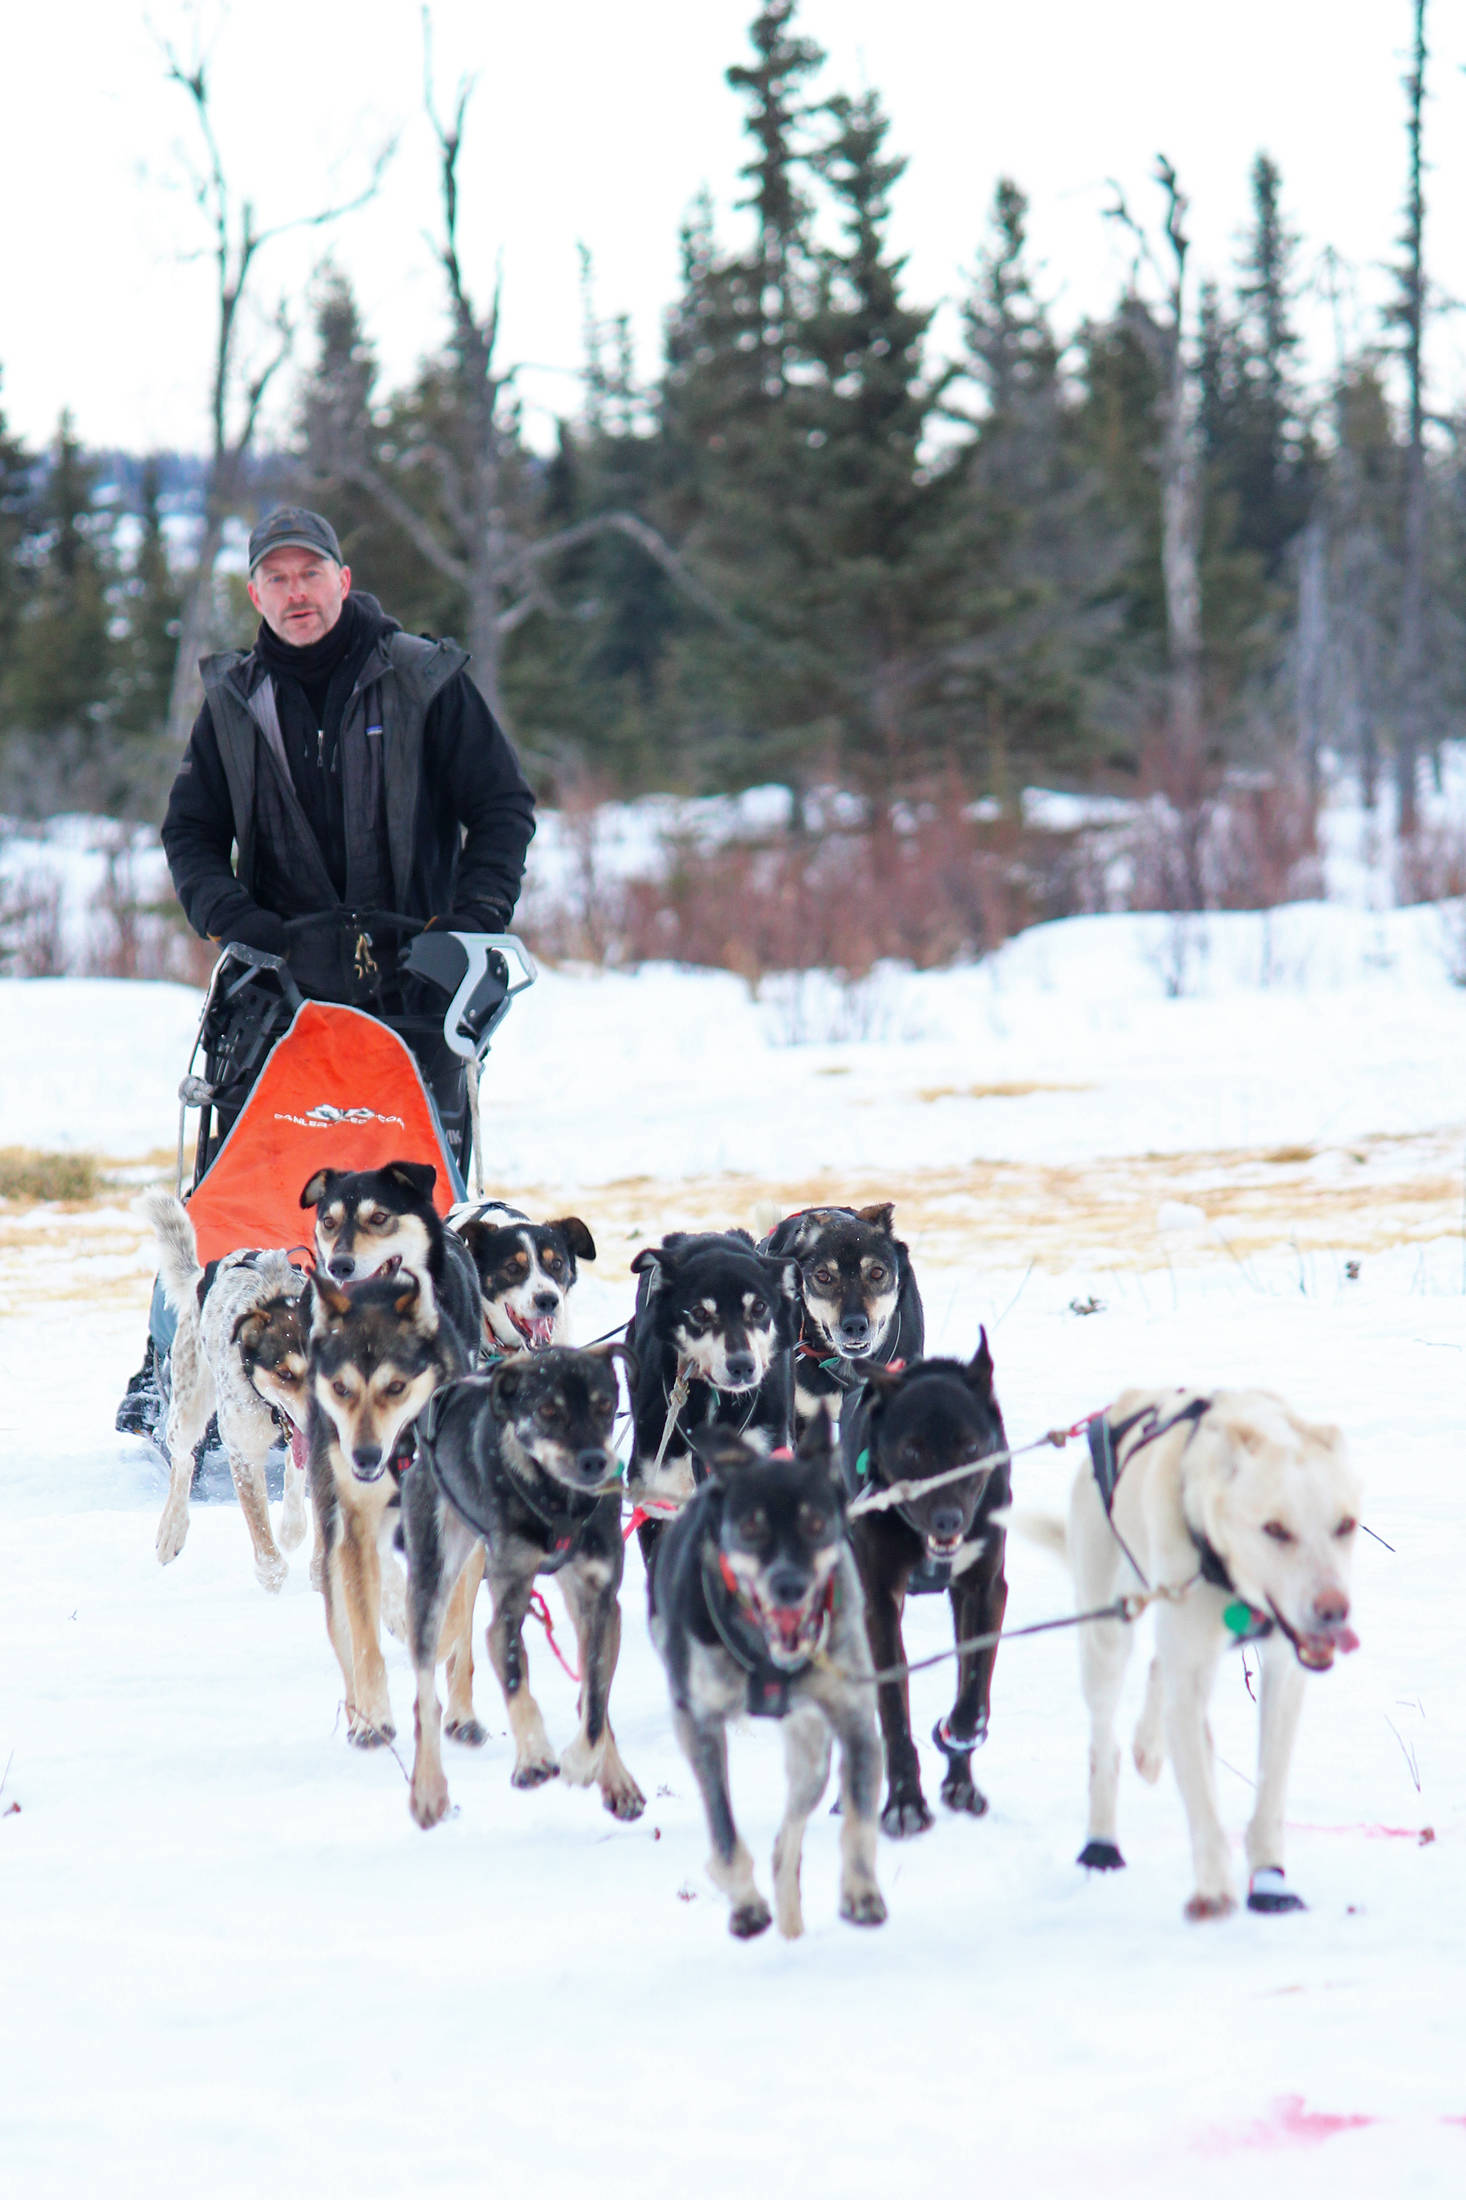 Musher Dave Turner pulls up to the finish line of the Tustumena 200 Sled Dog Race on Sunday at Freddie’s Roadhouse near Ninilchik. Turner took first place in the race that takes dog teams throughout the Caribou Hills on the lower Kenai Peninsula. (Photo by Megan Pacer/Homer News)